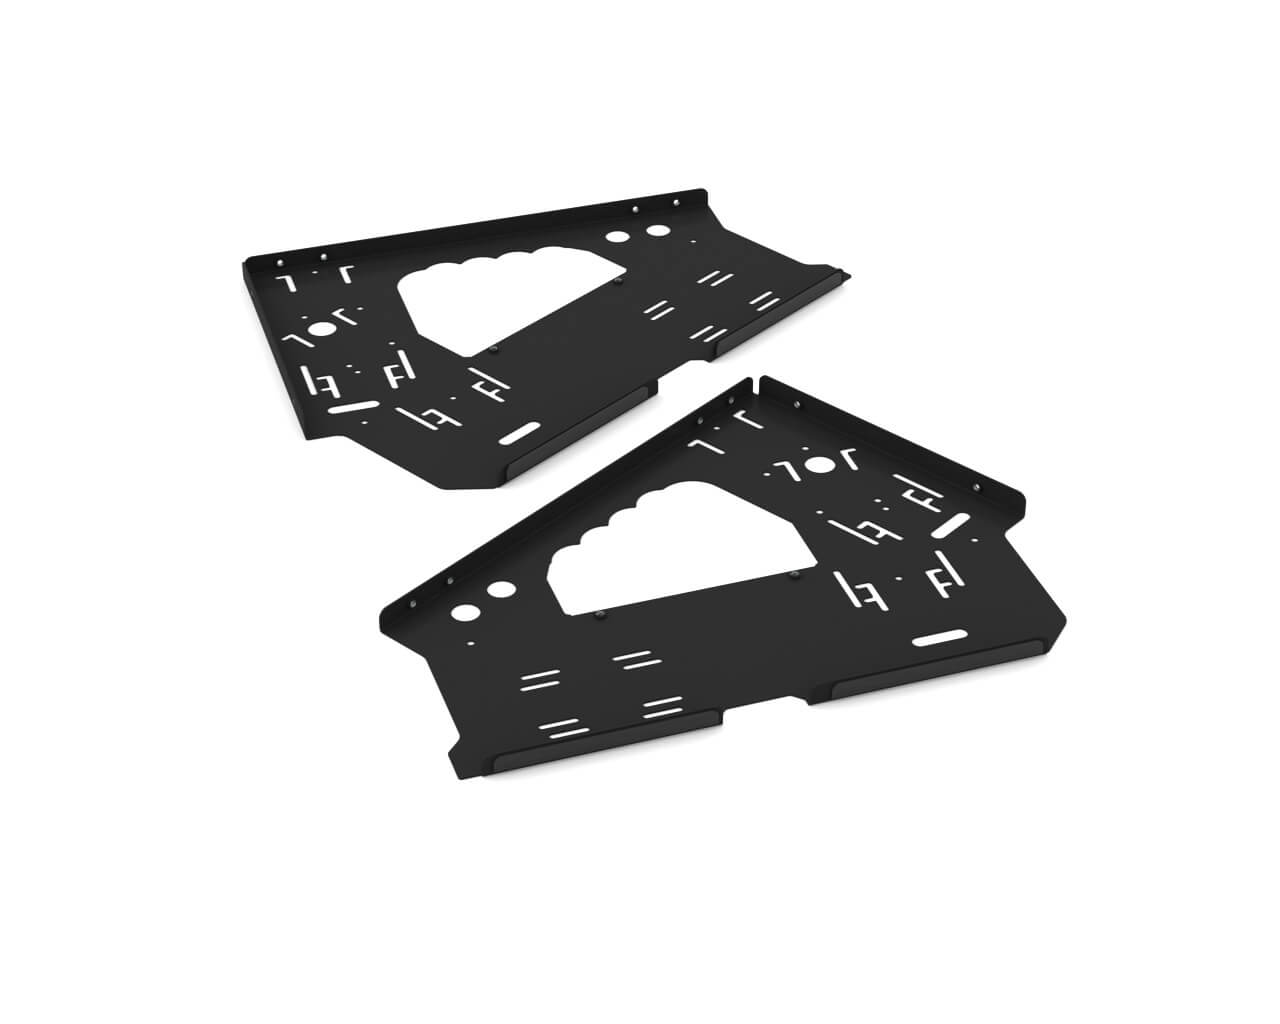 Praxis WetBenchSX Angle Edition Leg Replacements - PrimoChill - KEEPING IT COOL Black